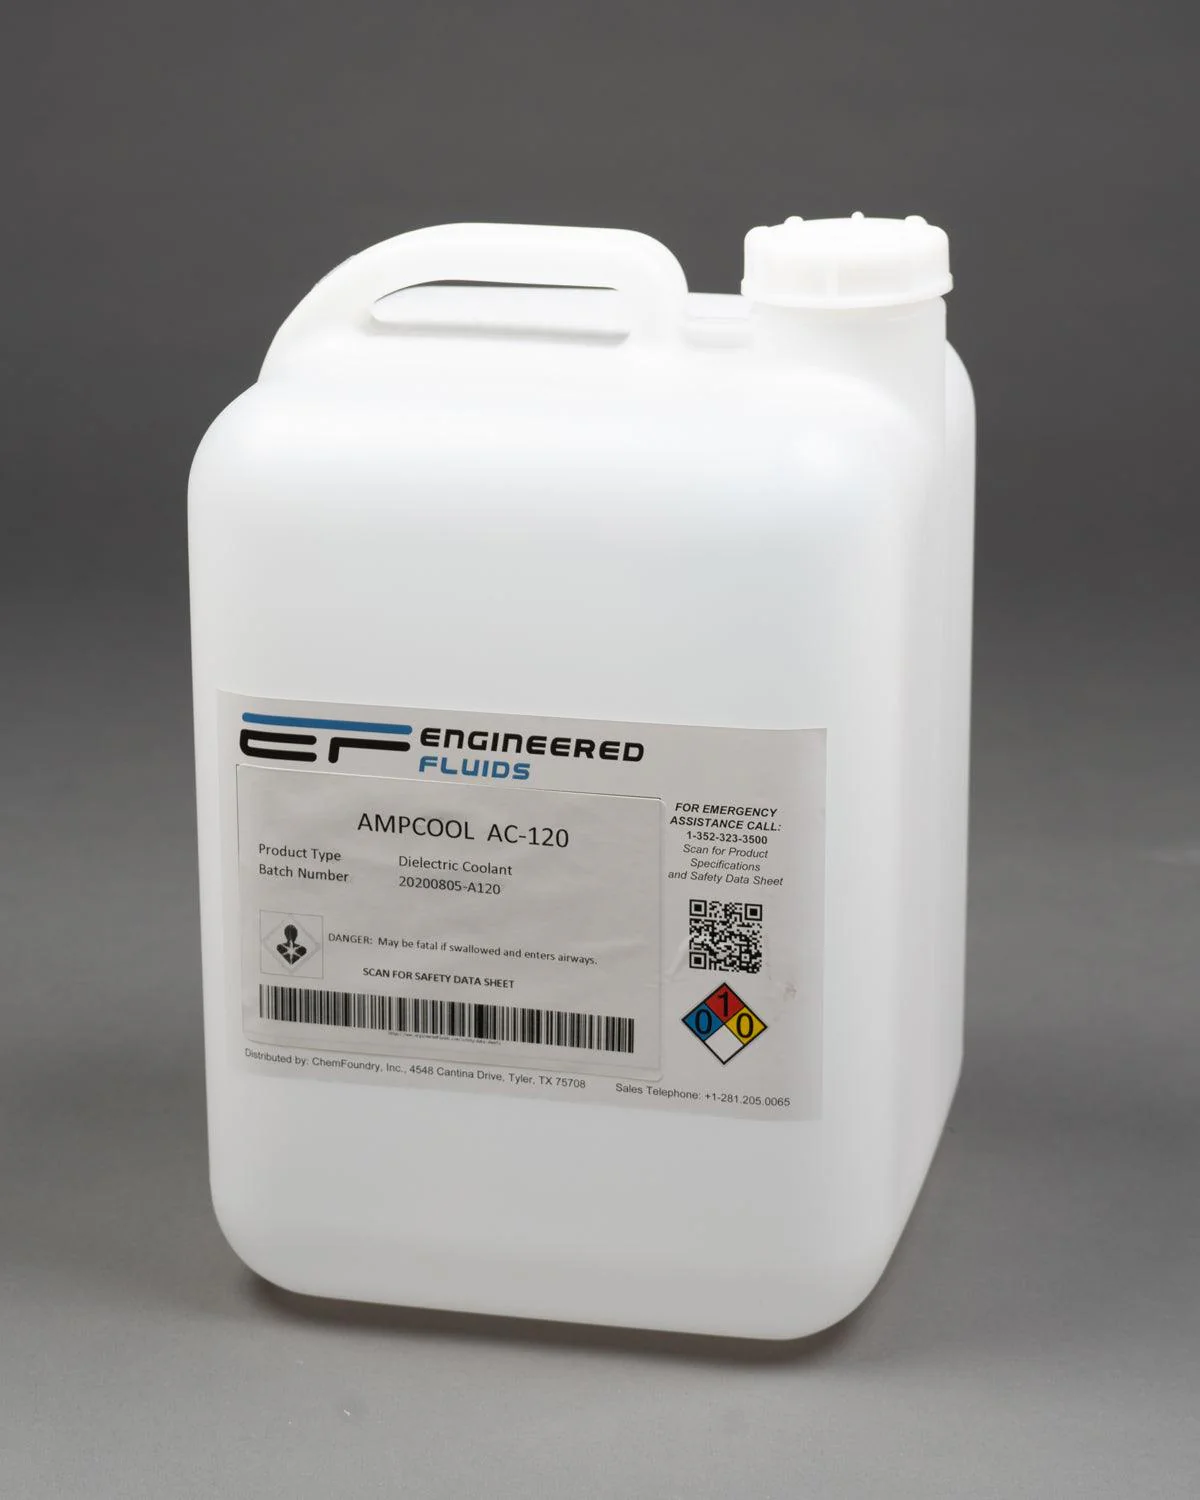 AmpCool® AC-120 Dielectric Coolant Questions & Answers